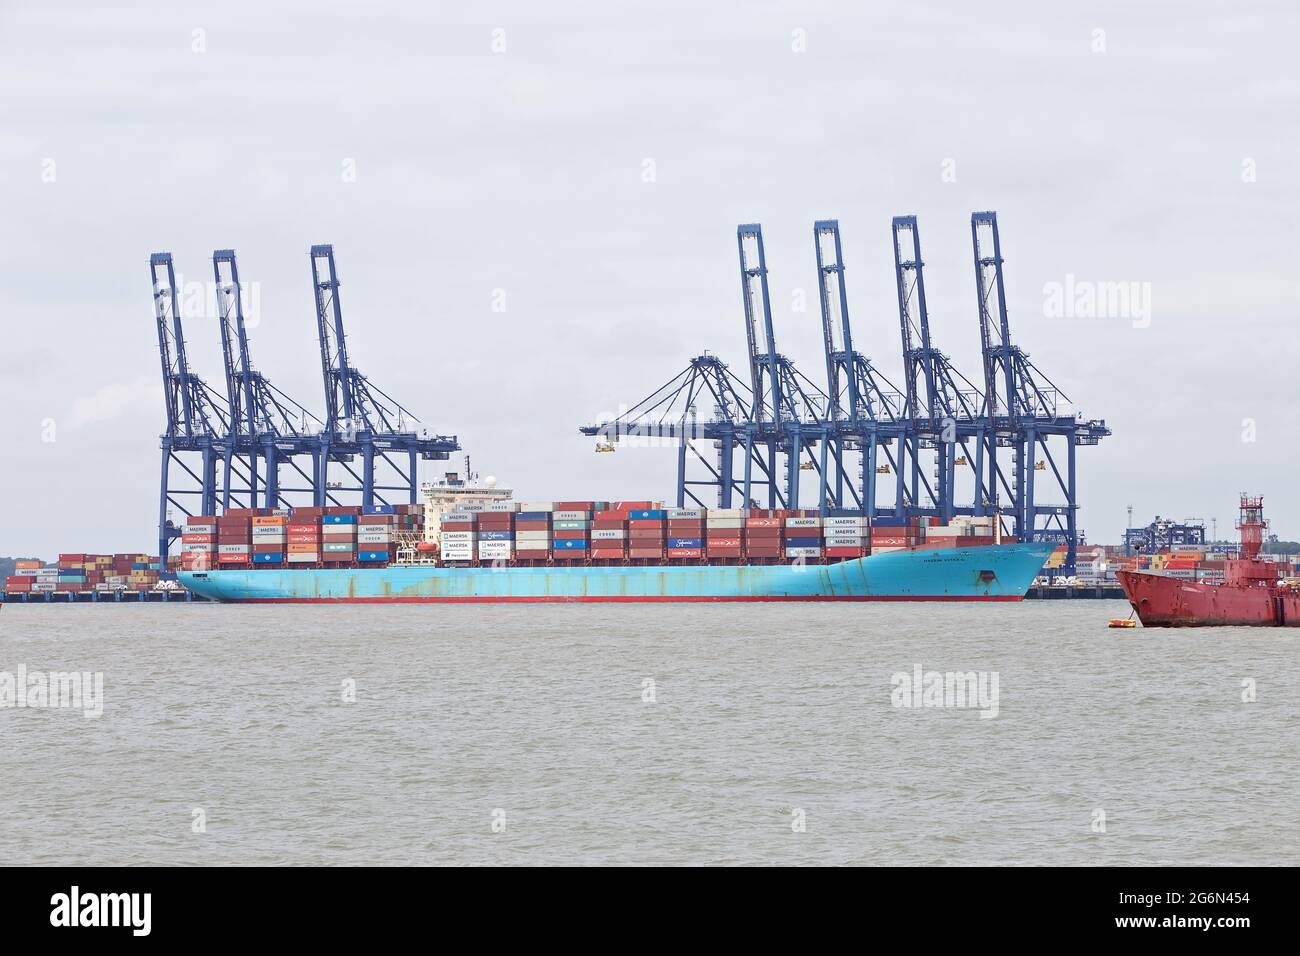 Container ship Maersk Kotka moored at the Port of Felixstowe, Suffolk, UK. Stock Photo